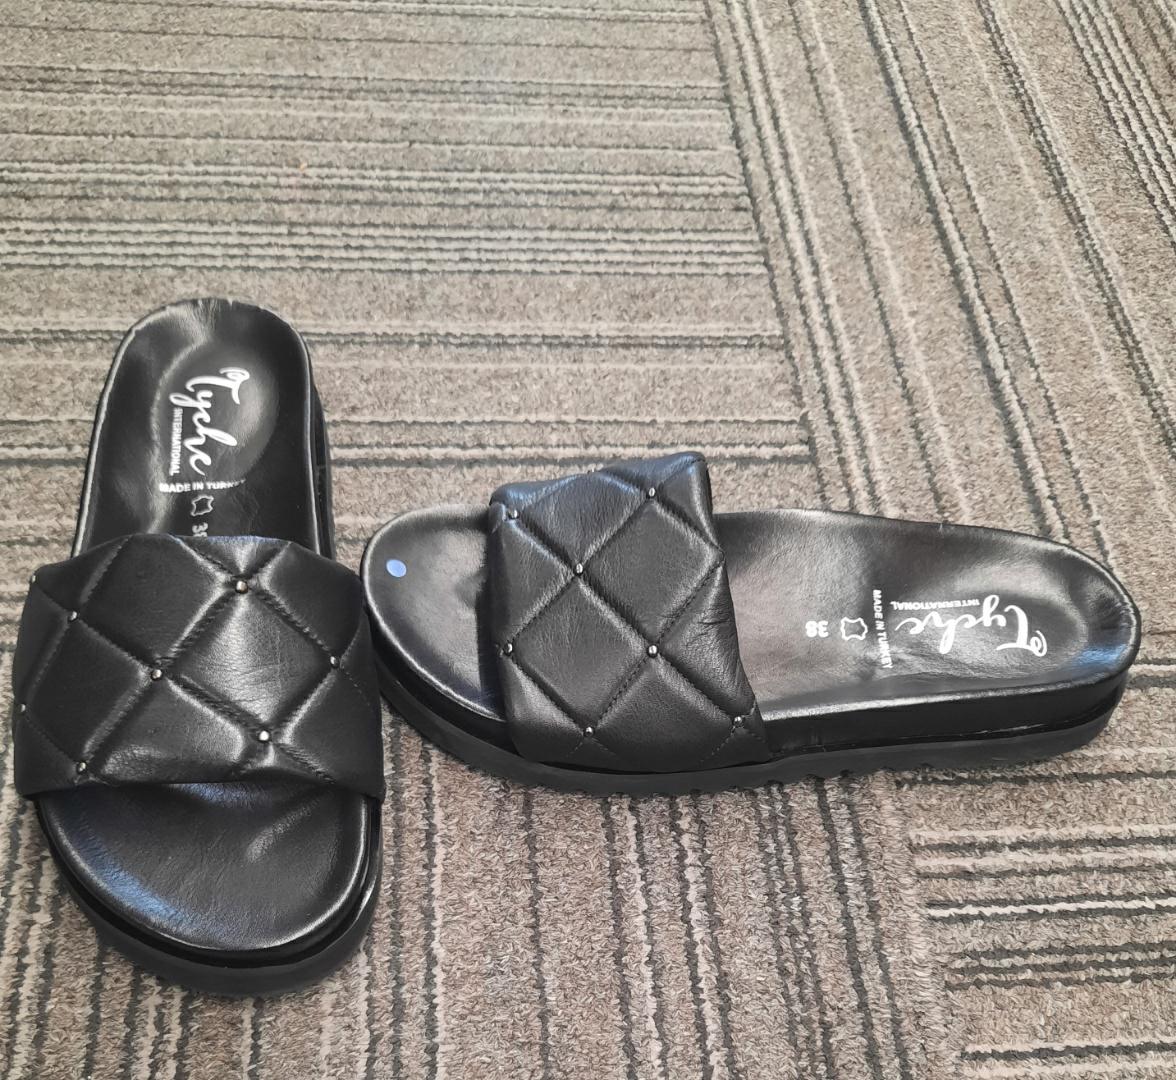 Brand NEW Quilted Slides, Black, Size: 38 Fit like an 8